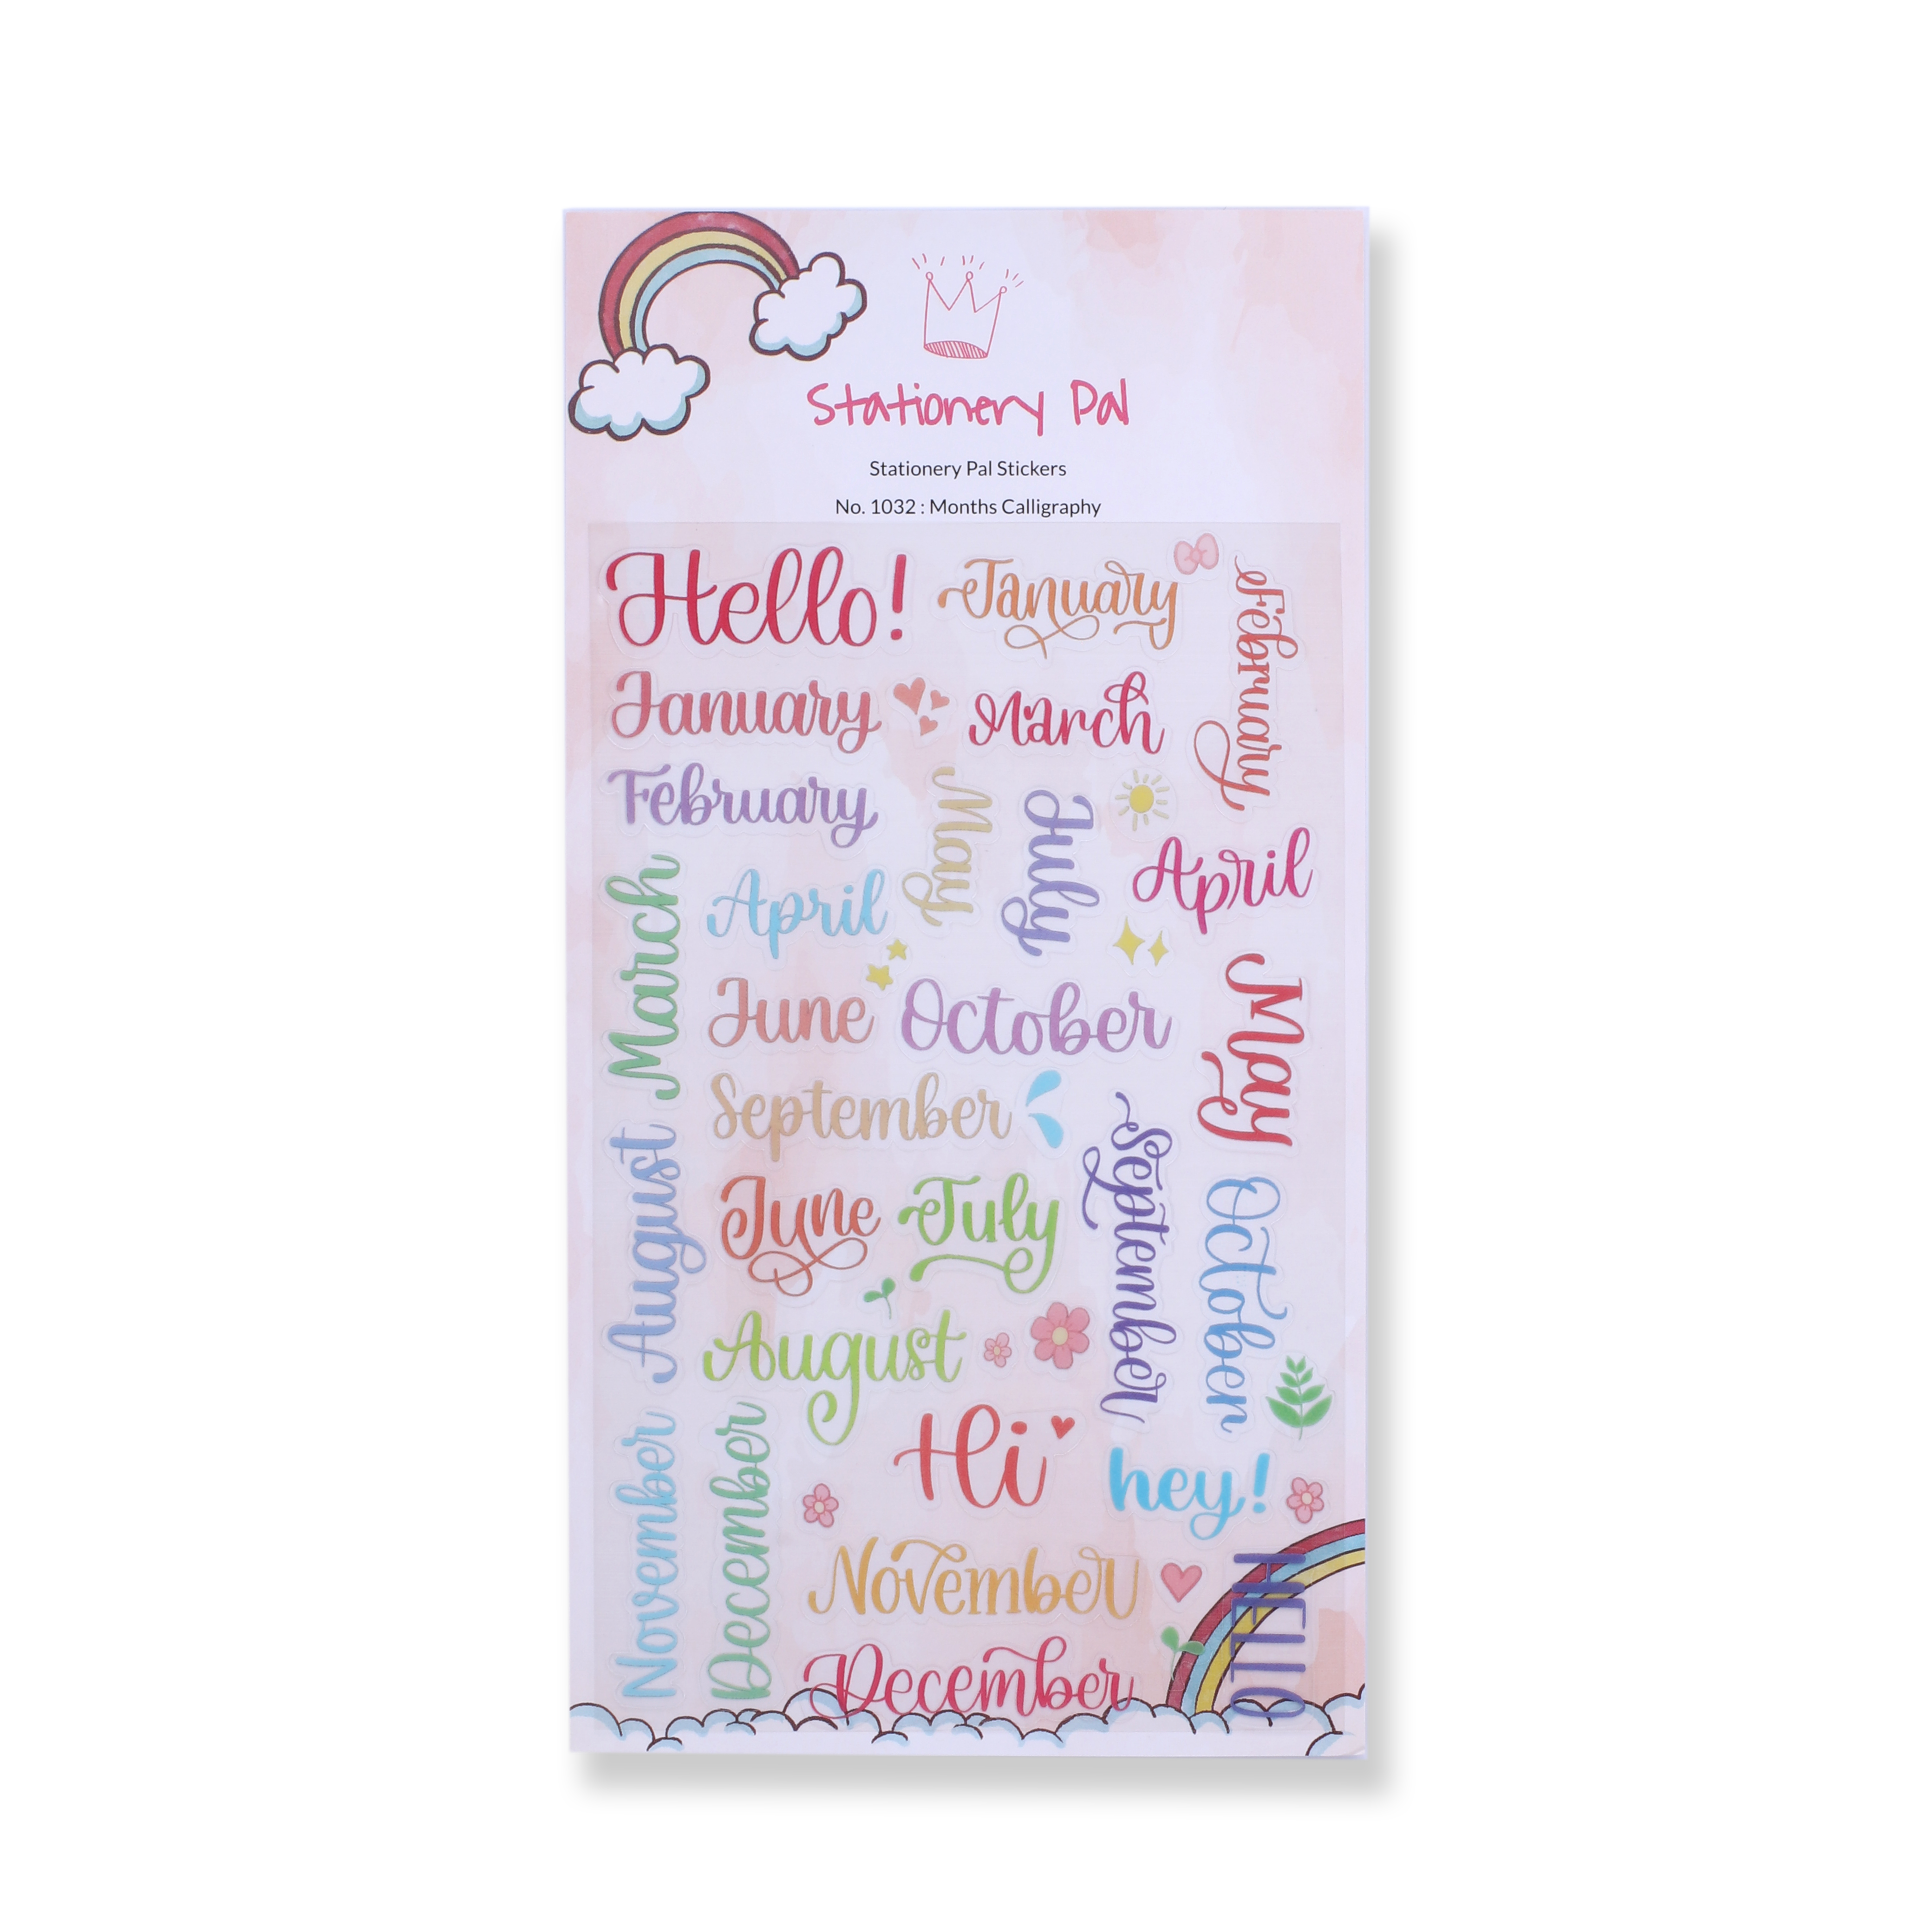 Stationery Pal Original Stickers - Months Calligraphy